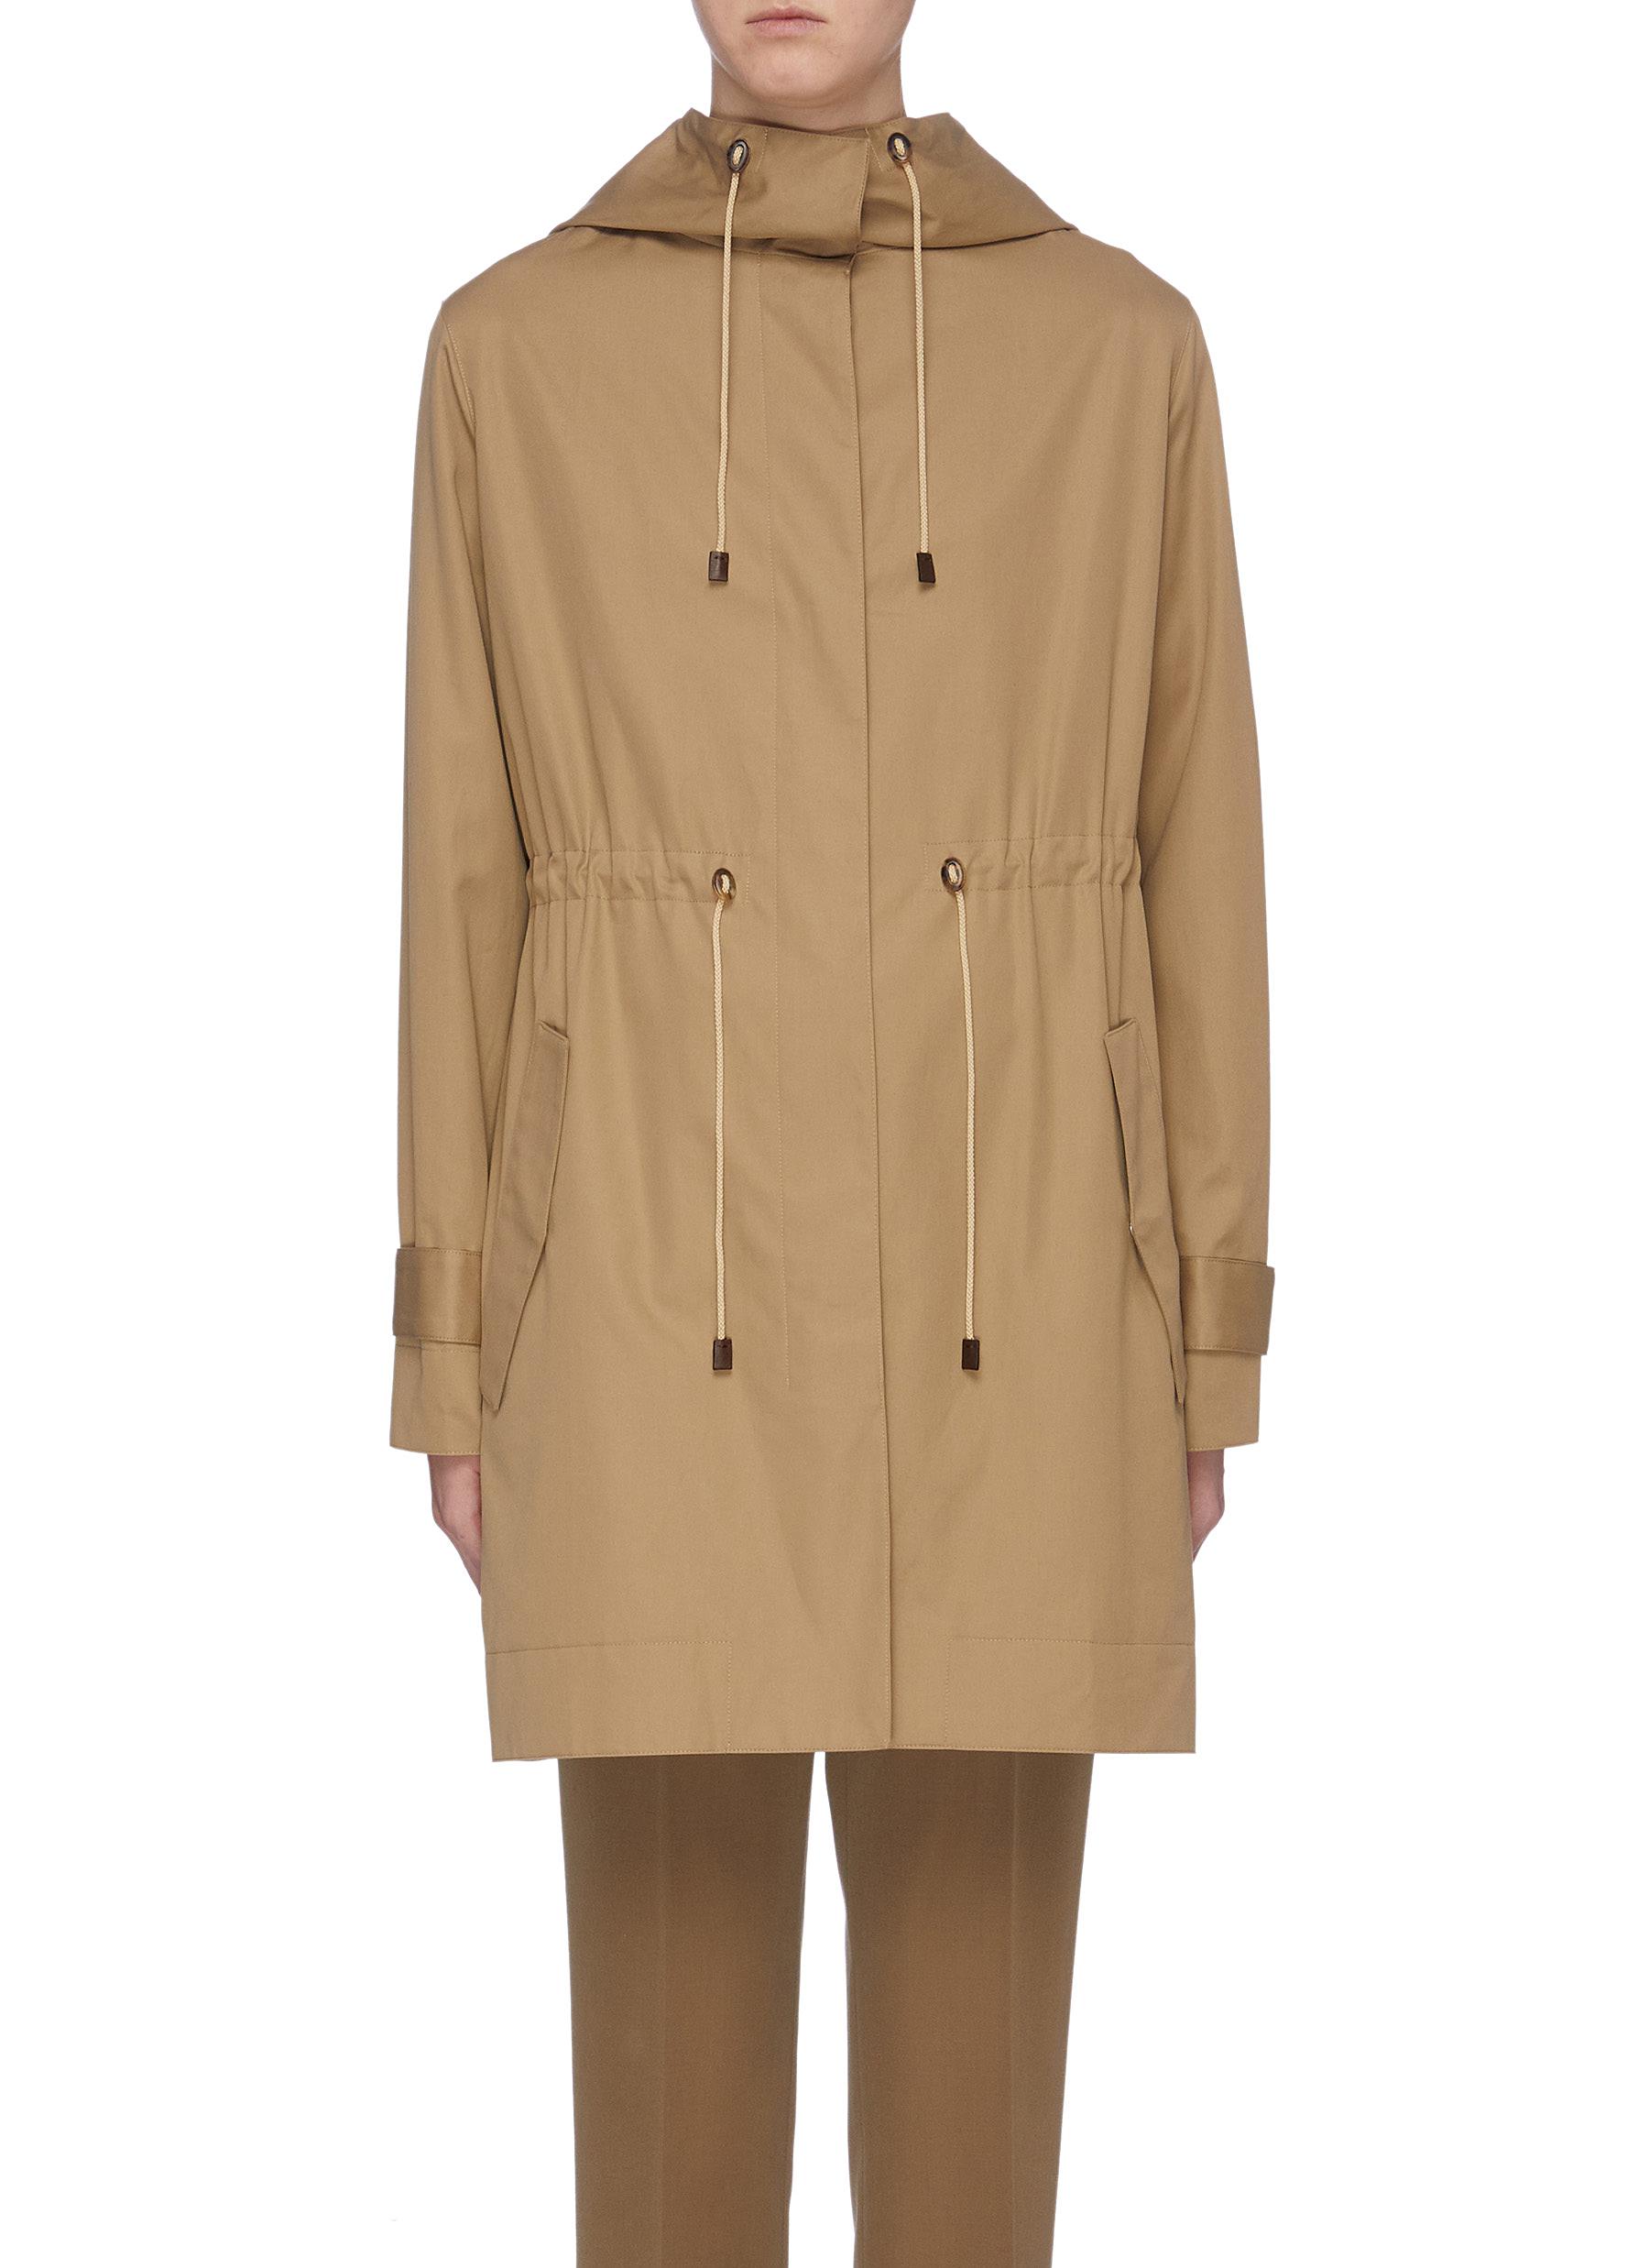 Haze hooded drawstring water-repellent twill parka by The Row